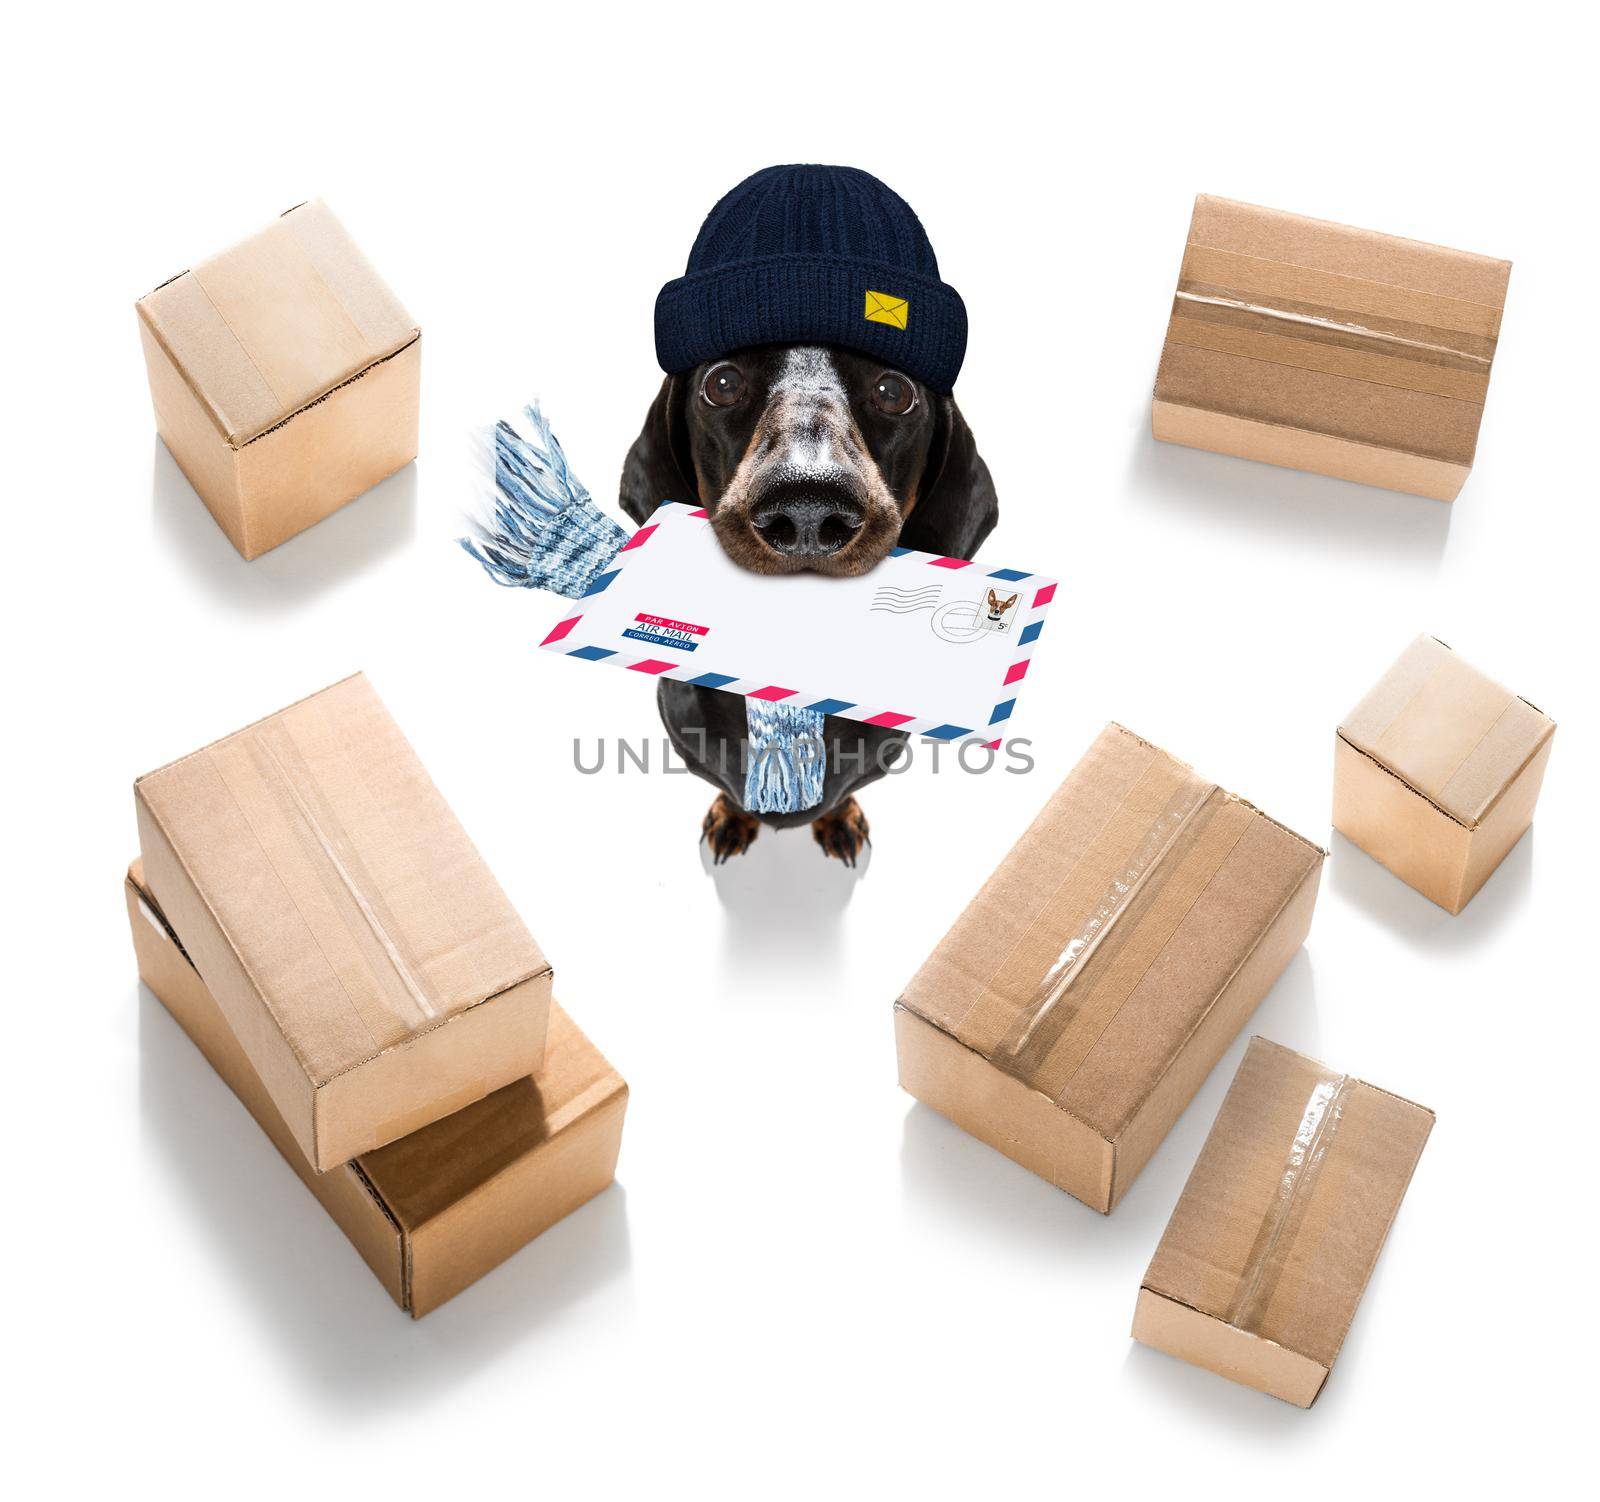 postman  dachshund sausage dog delivering a big white blank empty envelope, with boxes and packages